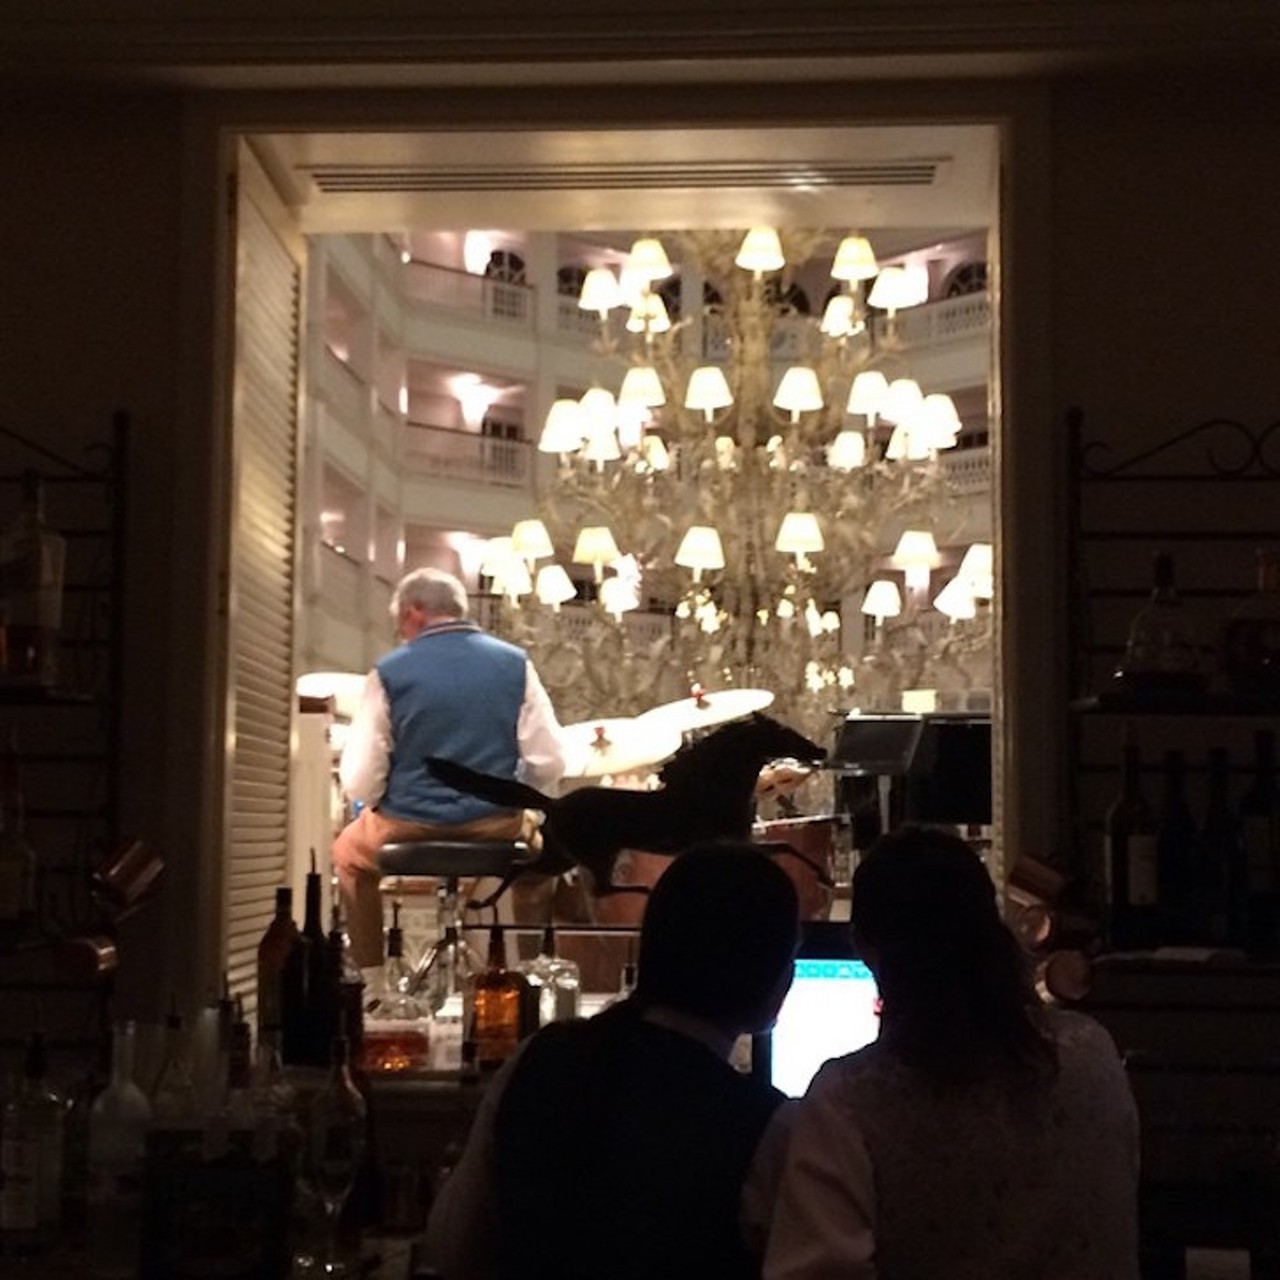 Mizner&#146;s Lounge
4401 Floridian Way, 407-939-3463
This upstairs bar is located right behind the Grand Floridian Society Orchestra bandstand, so every time you go there&#146;ll be a jazzy soundtrack to sip your Manhattans and sidecars to. 
Photo via maximum_wolf/Instagram